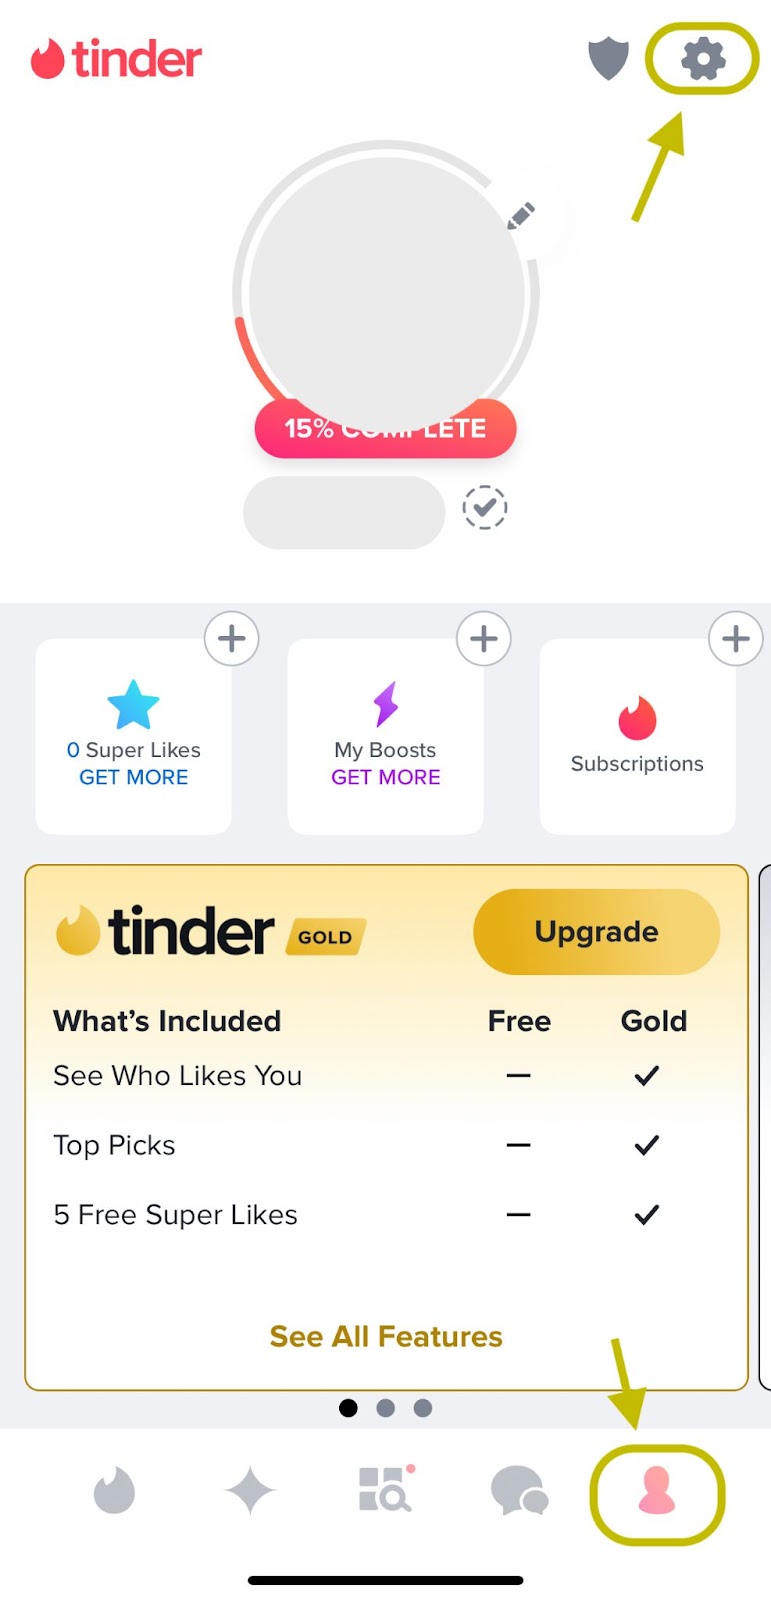 Tinder mobile phone interface showing the Profile tab, including details of Tinder Gold subscription.